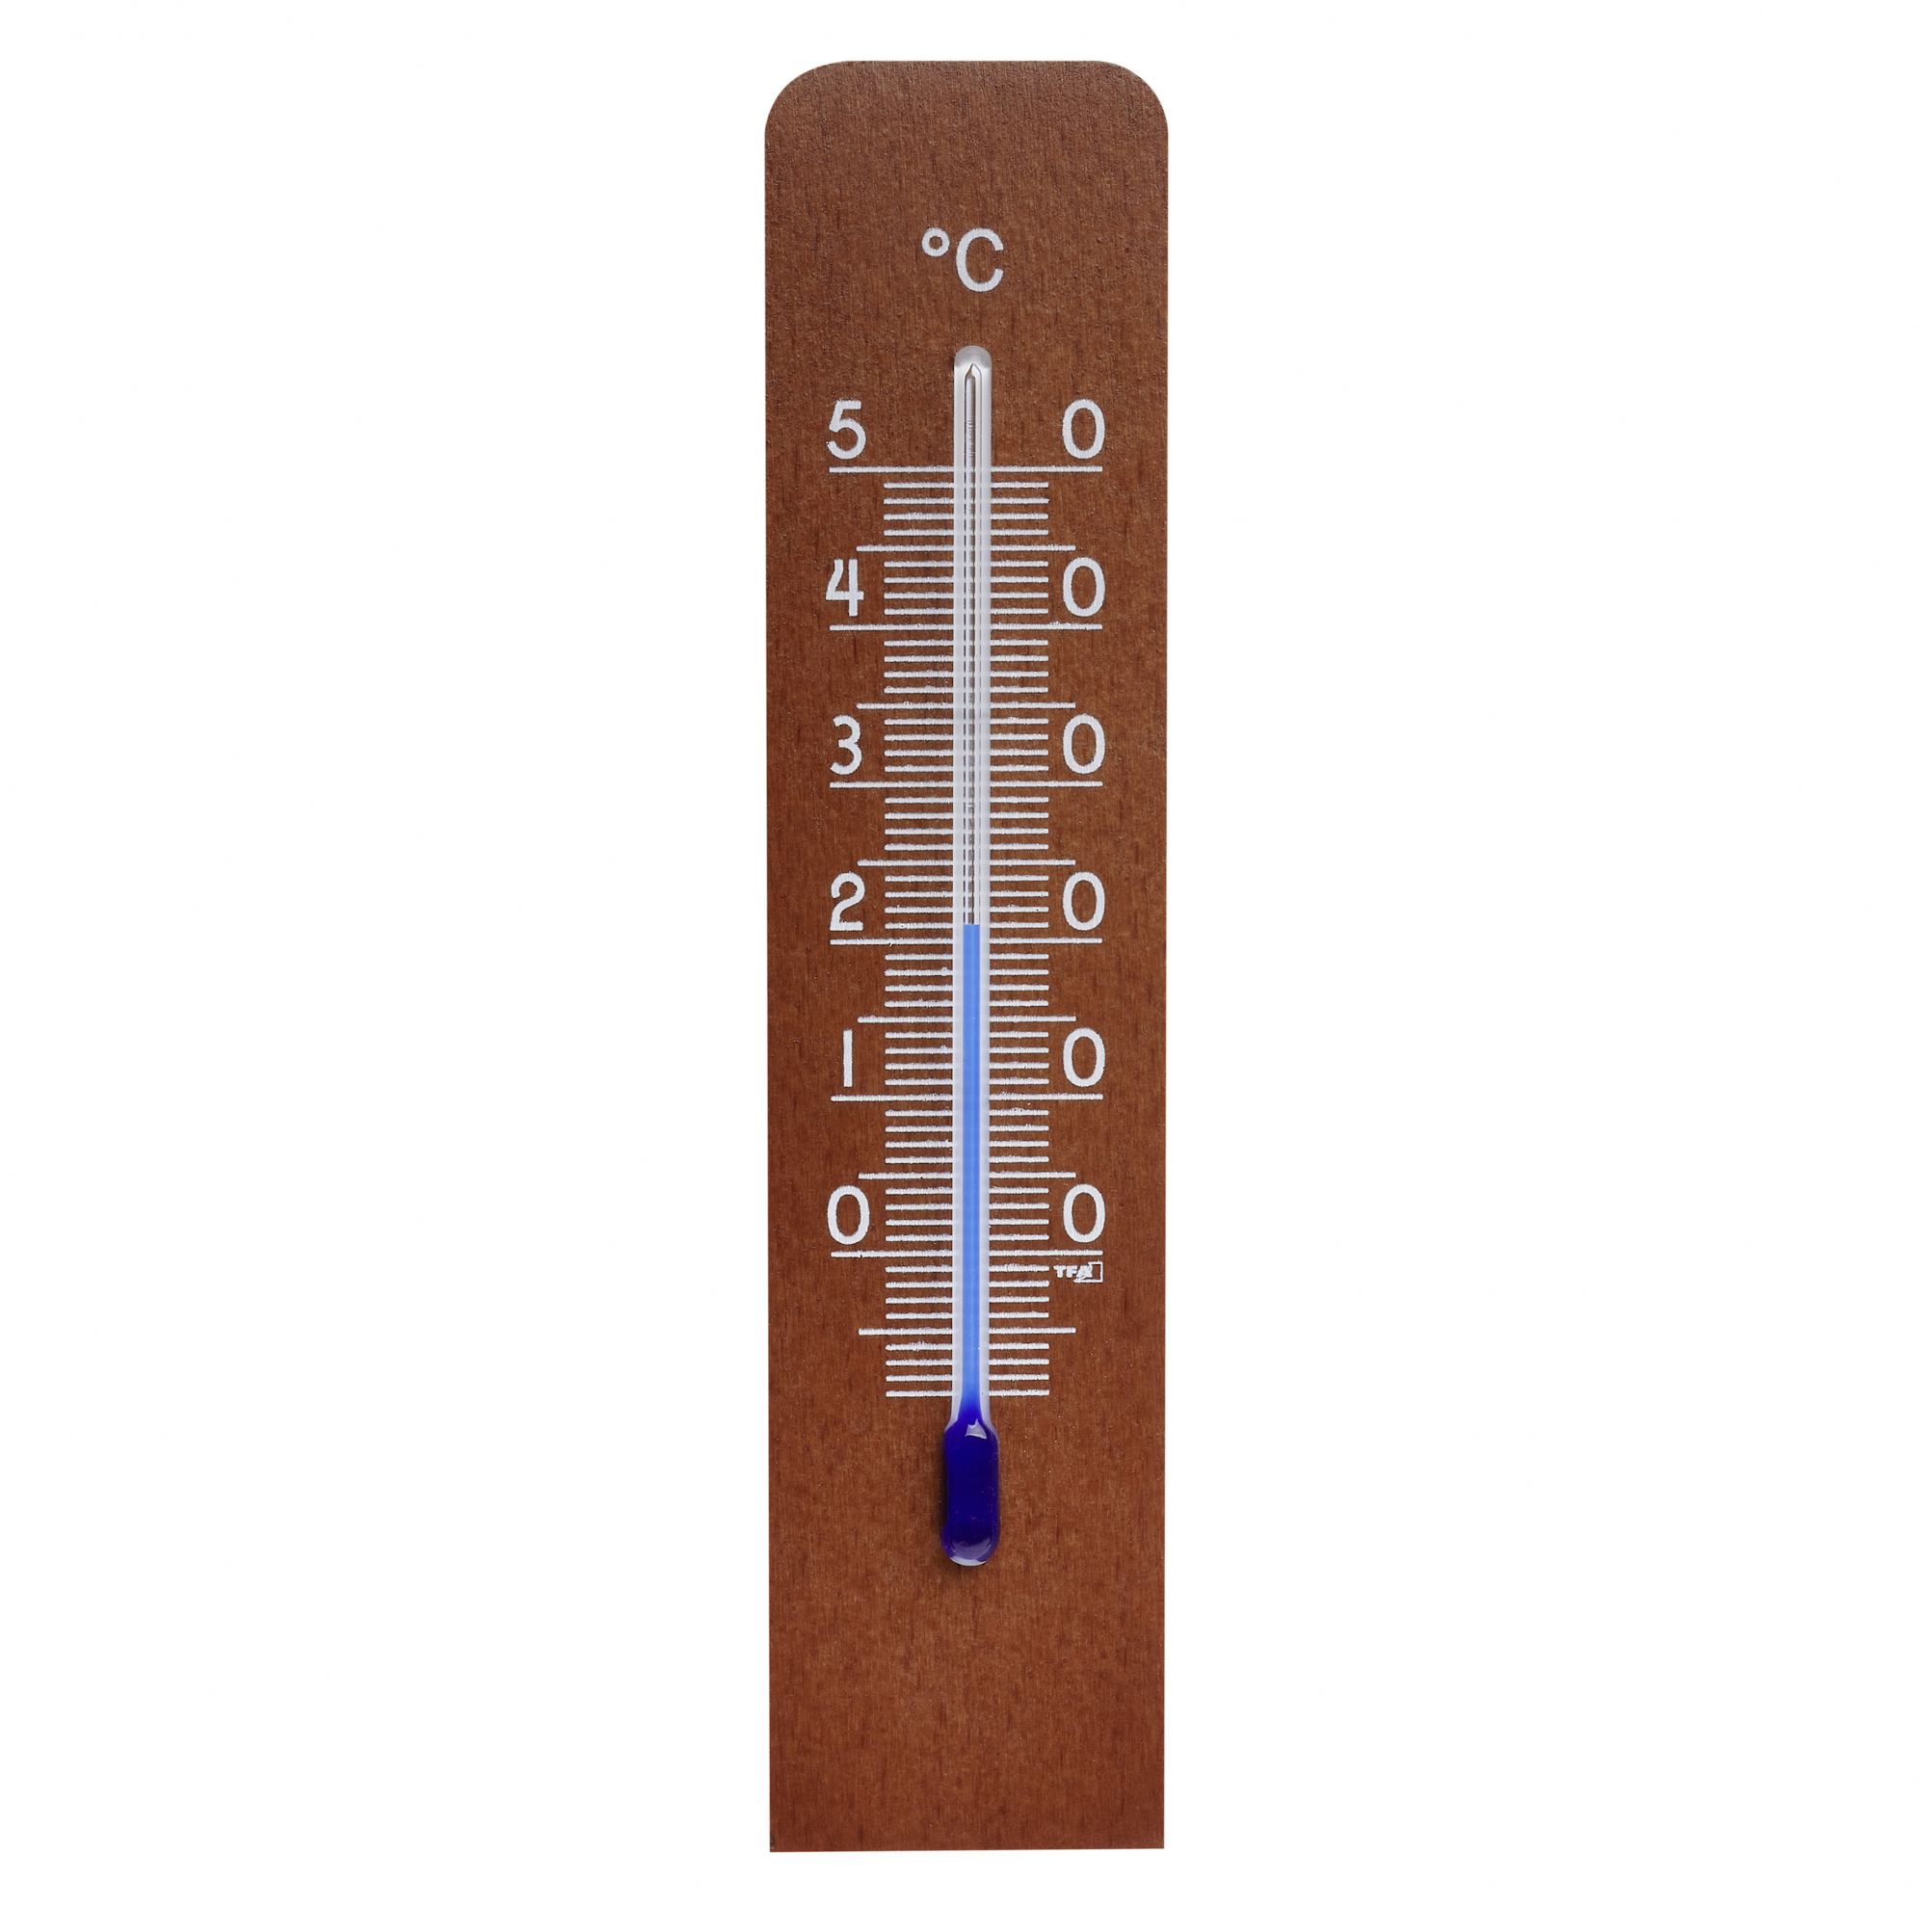 TFA 12.1057.03 analoges Innenthermometer